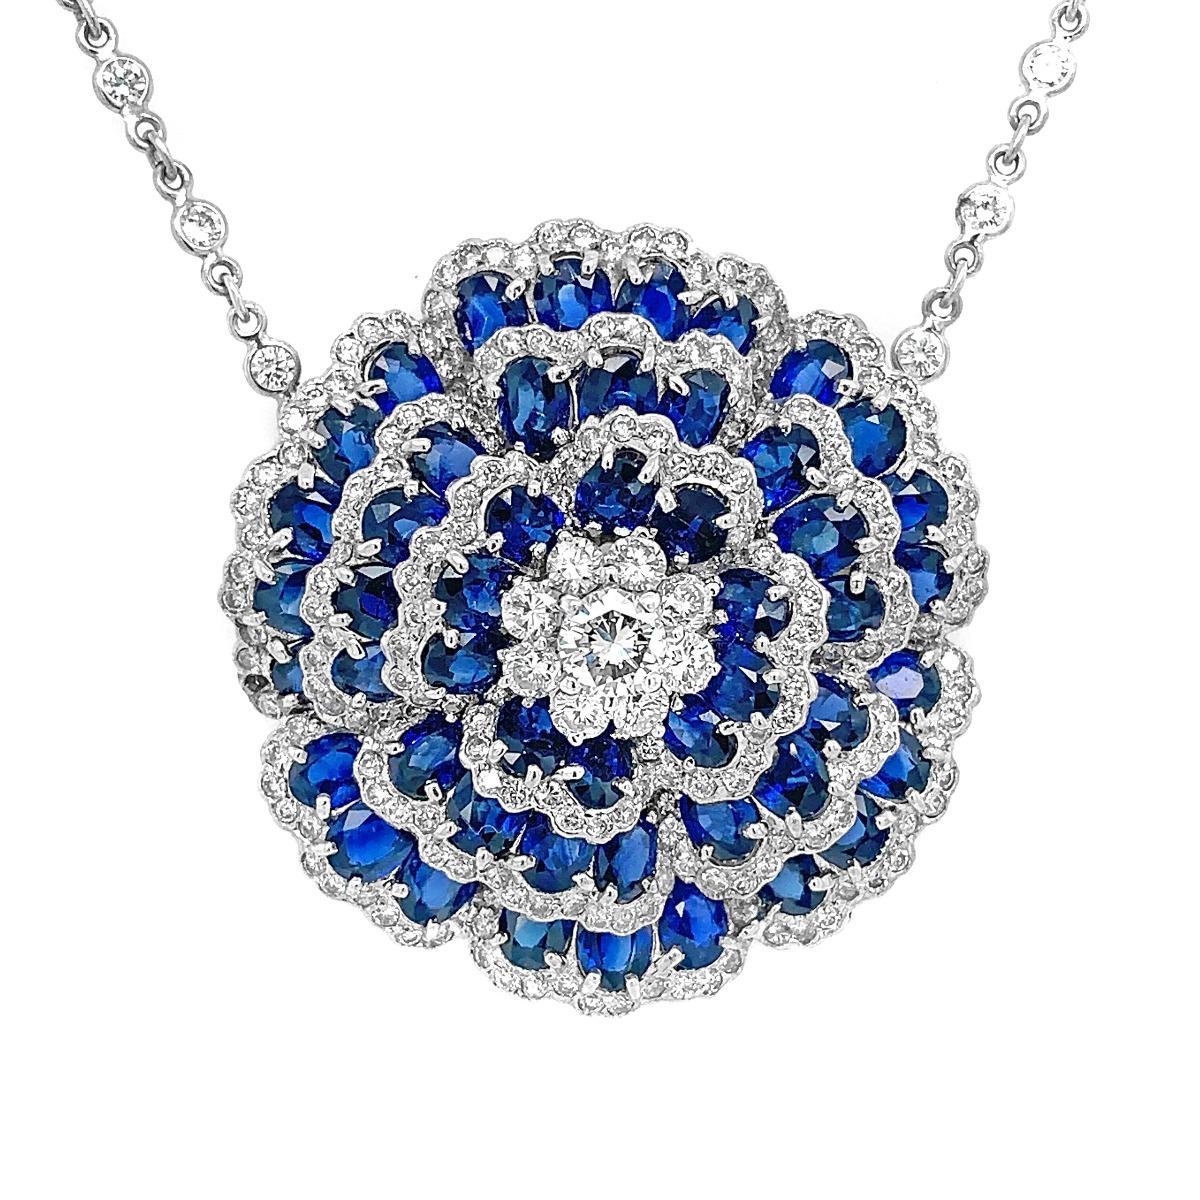 Sapphire Diamond Flower Necklace

Condition: Excellent
Style: Chain
Gemstone: Sapphire & Diamond
Item Weight: 20.1 grams
Length: 4.3 inch
Width : 1.2 inch